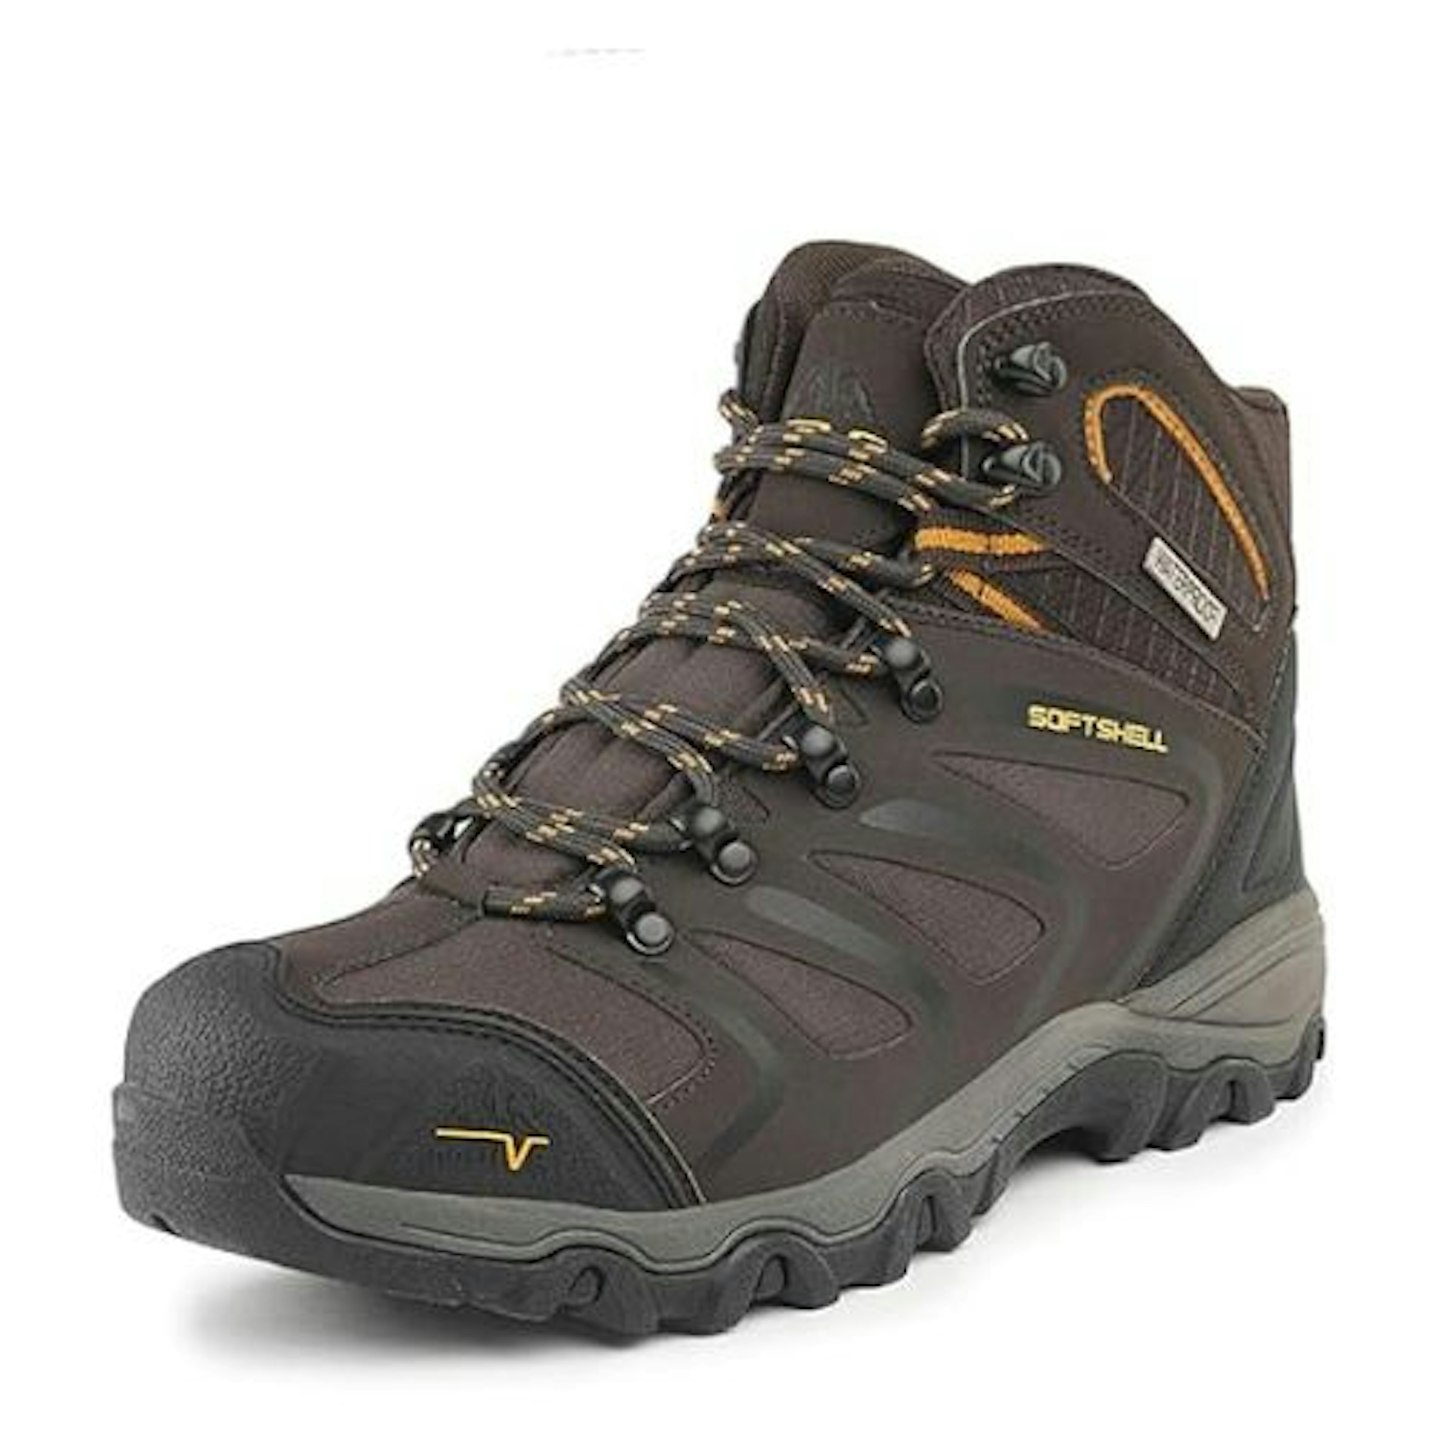 NORTIV 8 Men's Ankle High Waterproof Hiking Boots Backpacking Trekking Trails Shoes